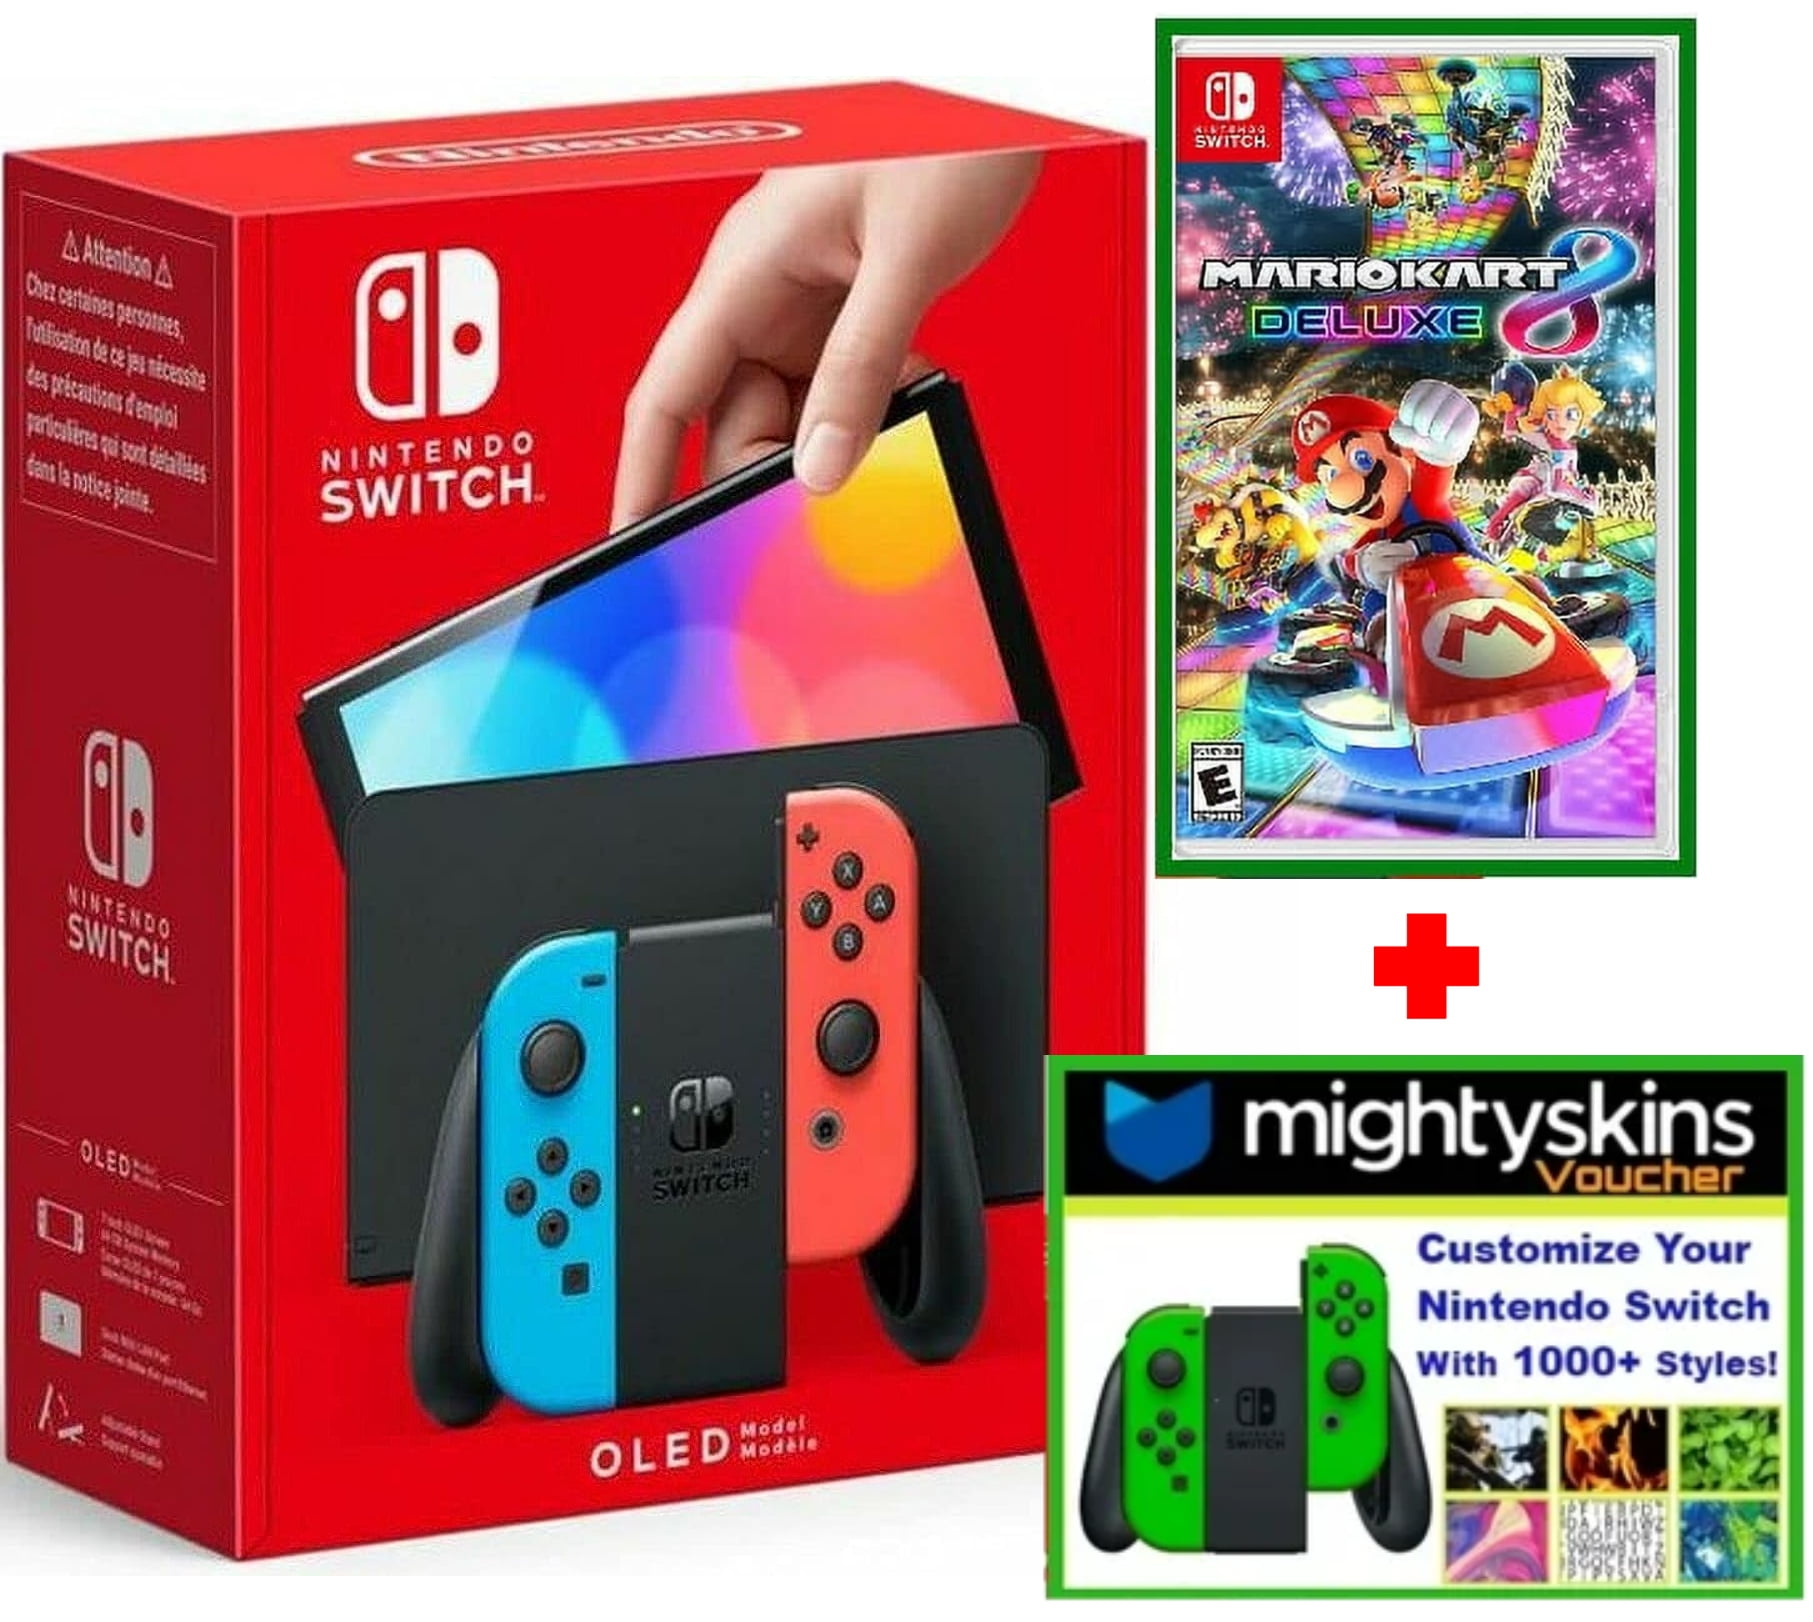 OLED Mightyskins Red Import Nintendo - Kart Plug US Mario 8 Console Switch - Joy-Con Bundle Deluxe Voucher with & Neon with w/ Neon Model Blue Limited Game &